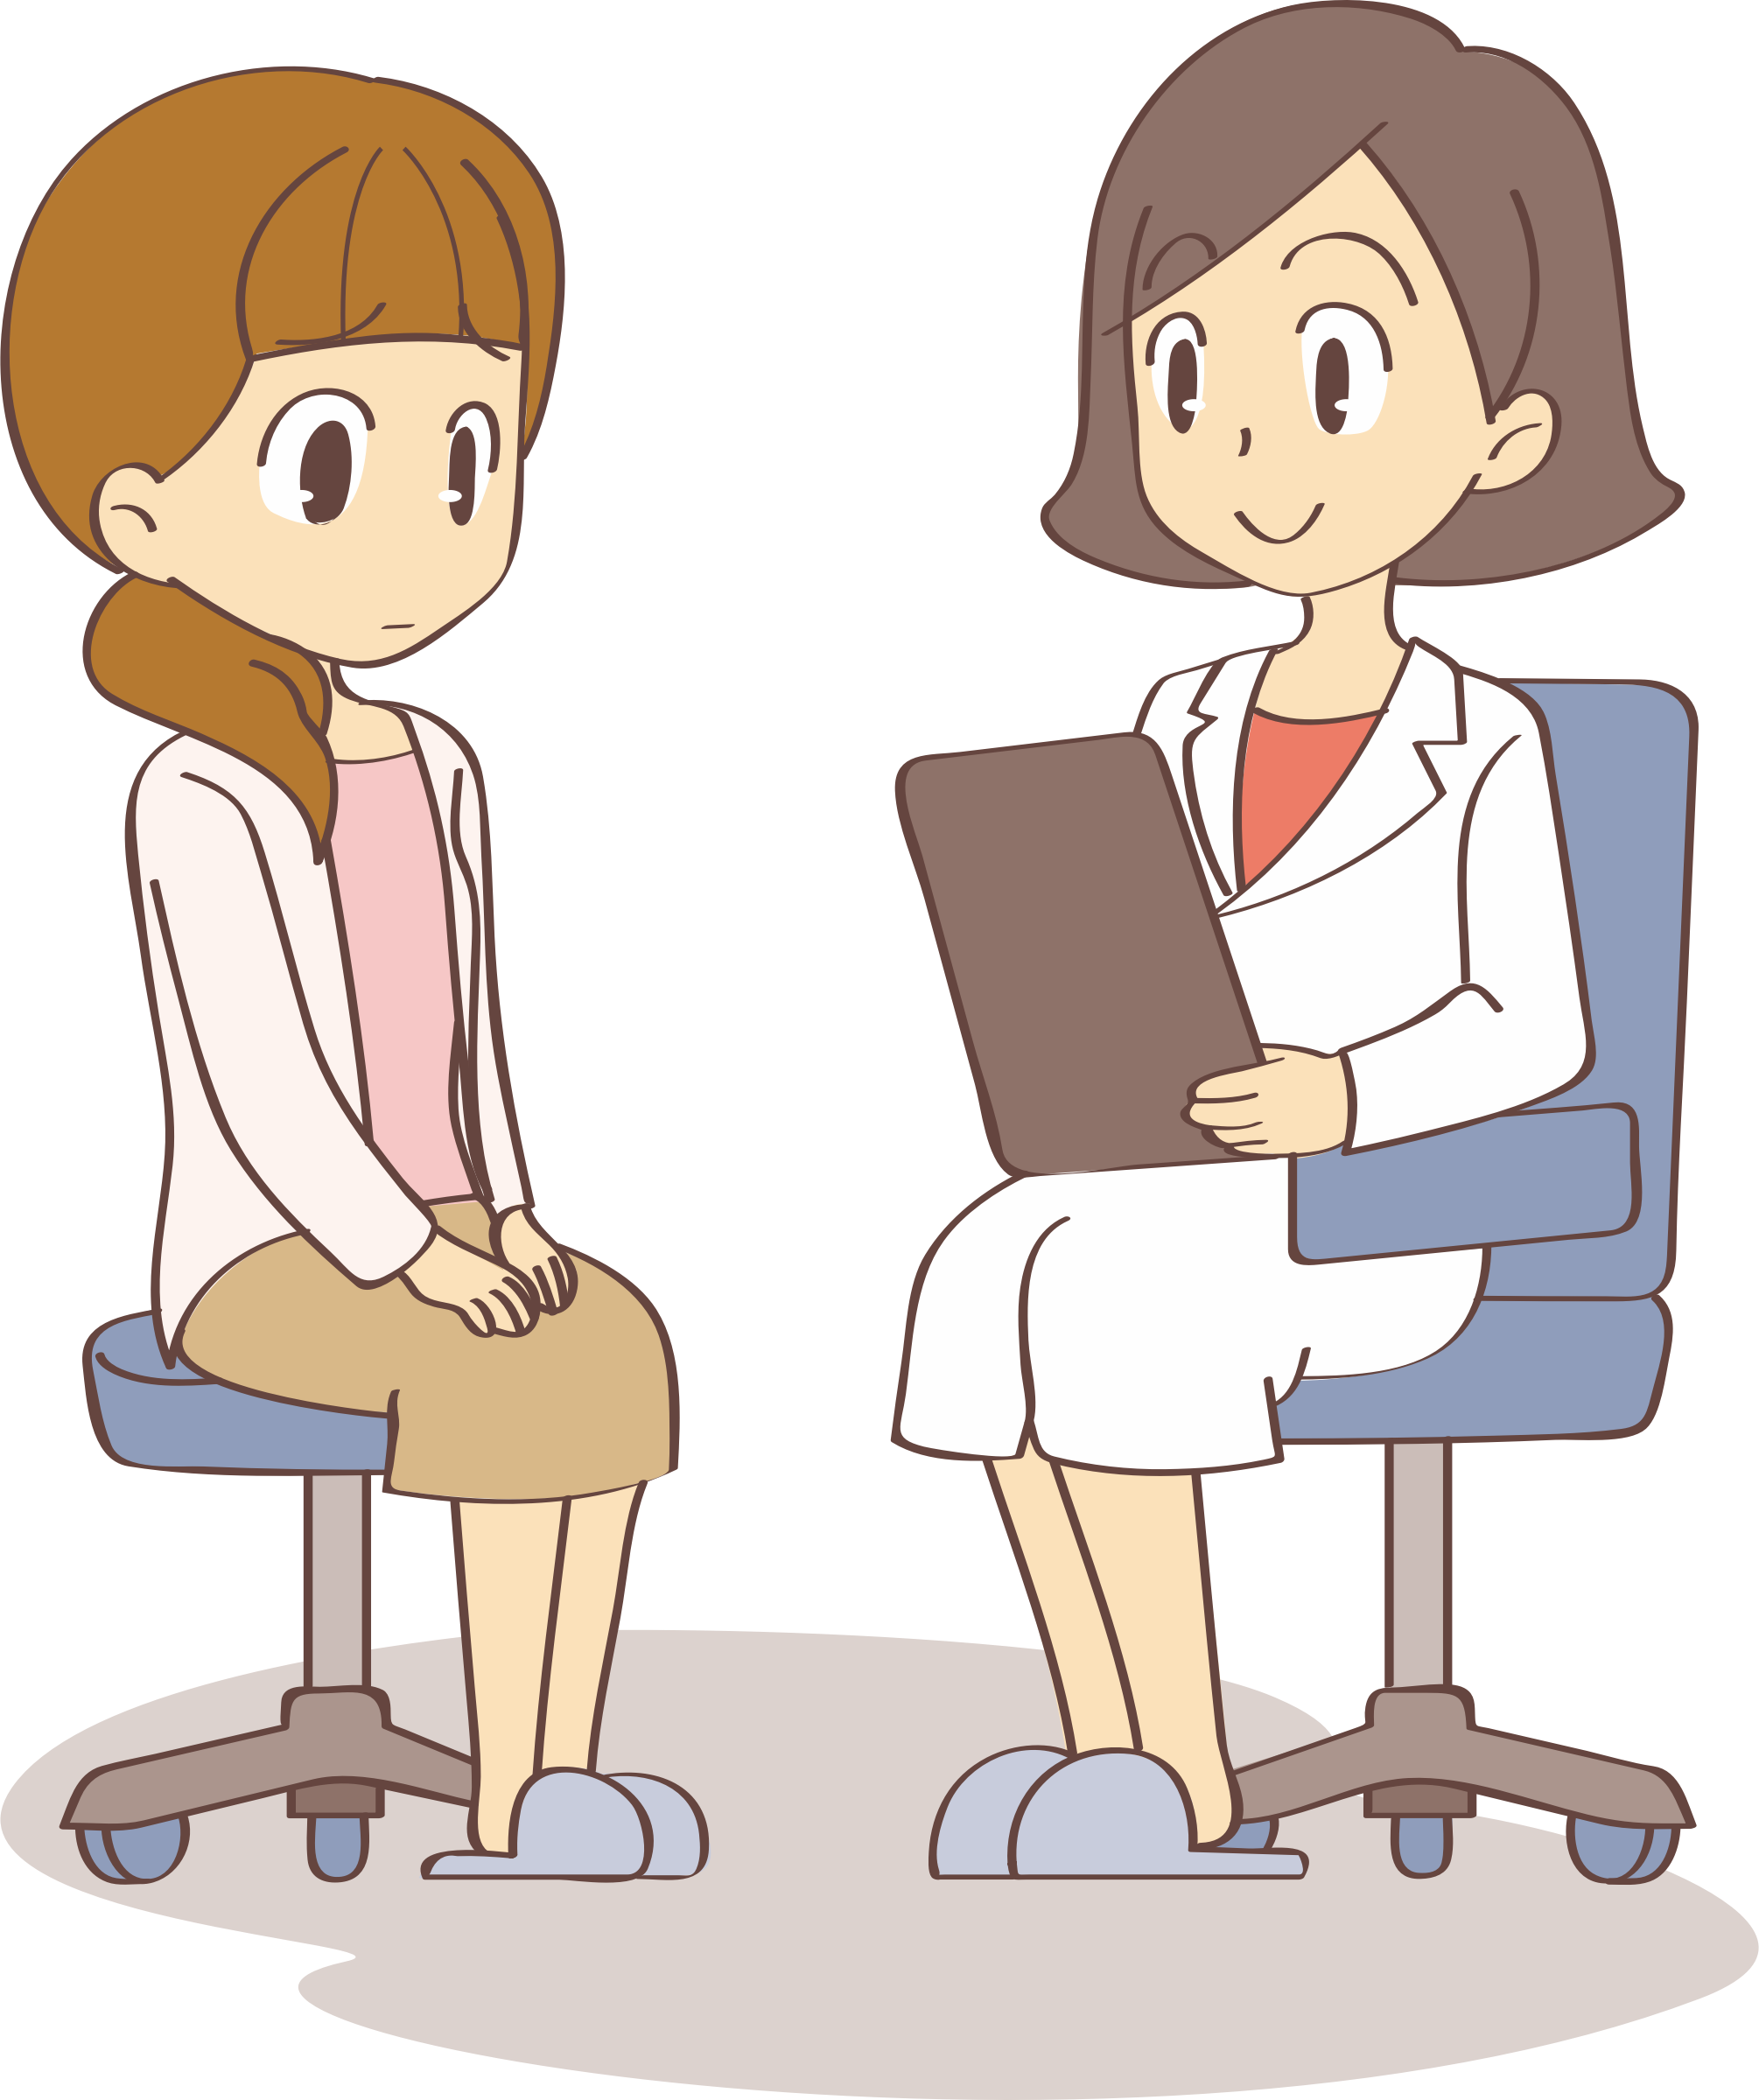 Related Doctor Consultation Clipart - Medical Consultation Clipart (2010x2400)